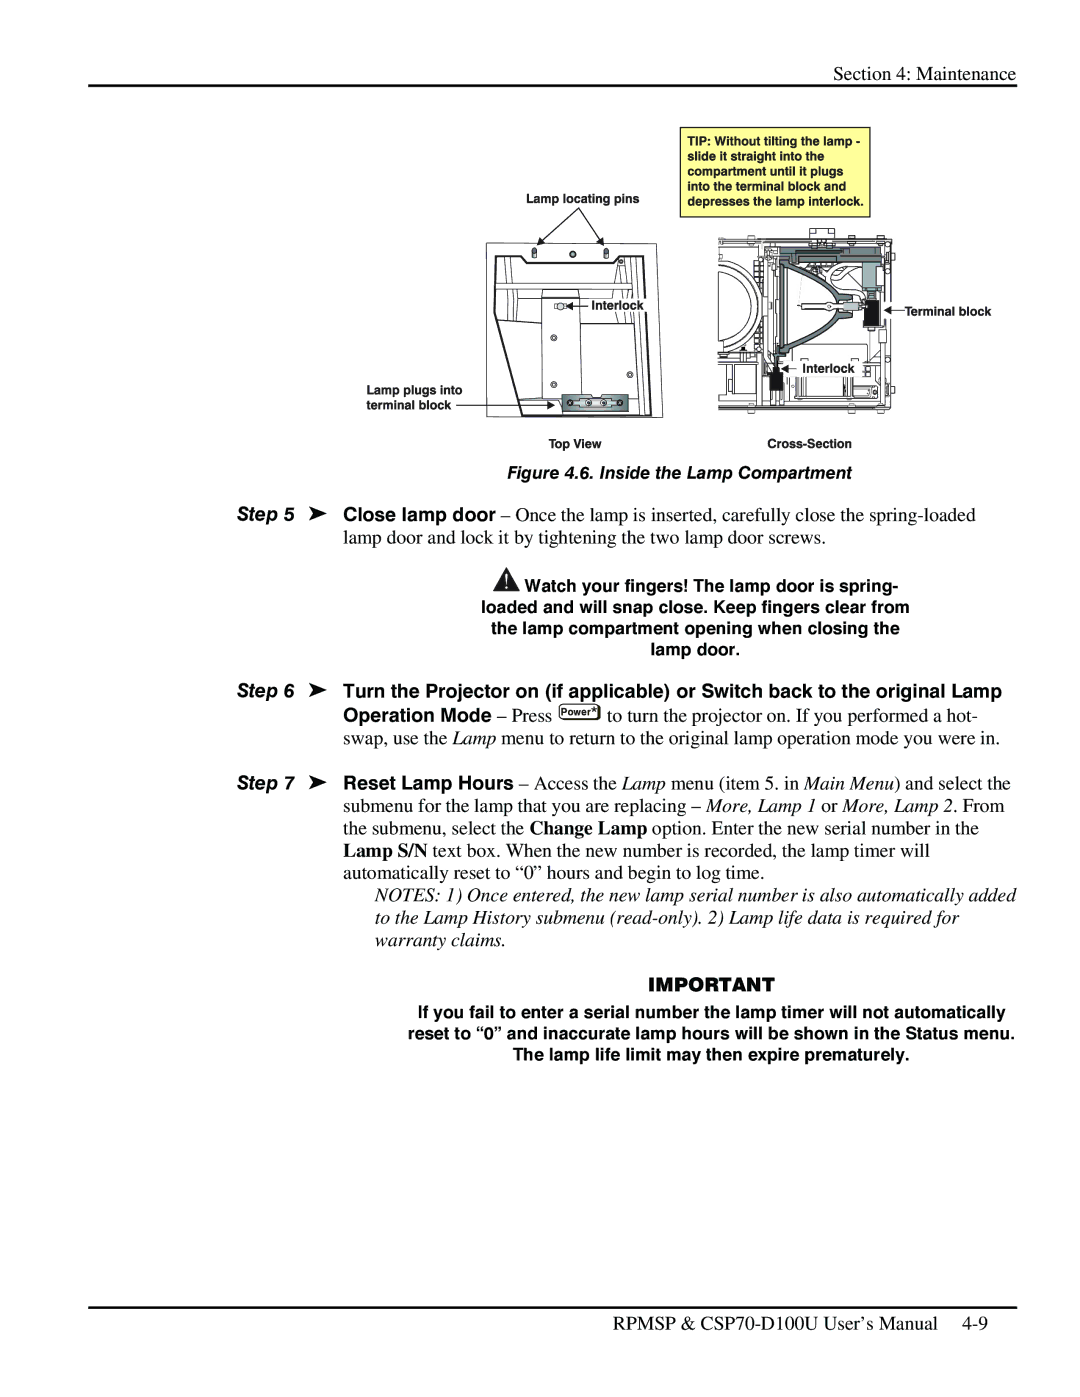 Christie Digital Systems CSP70 user manual Inside the Lamp Compartment 